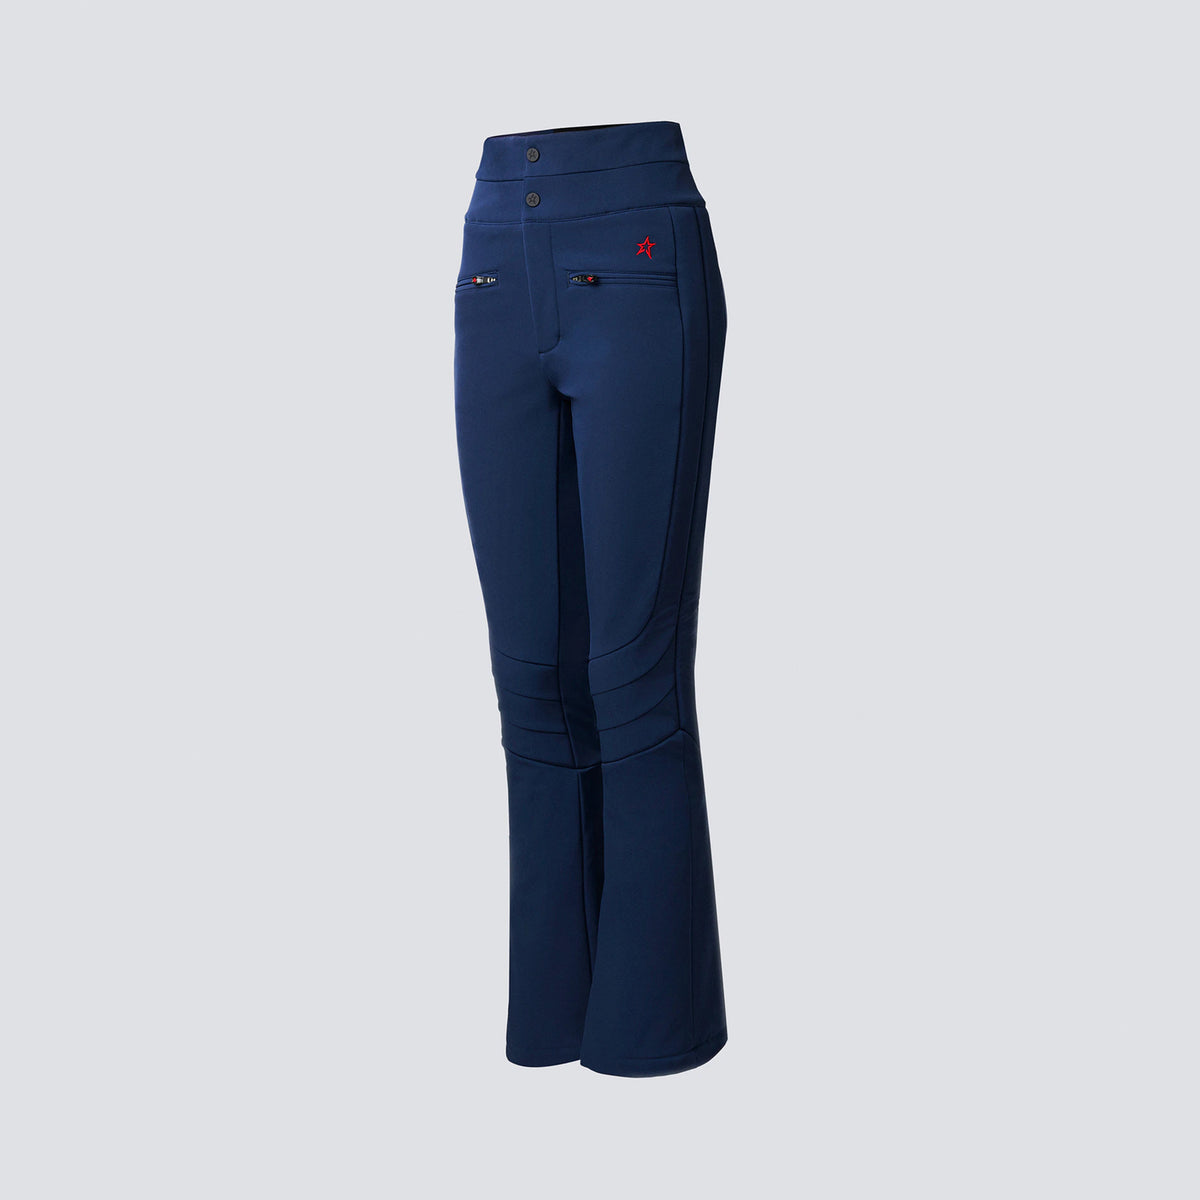 Aurora High Waist Flare Pant in Navy by Perfect Moment